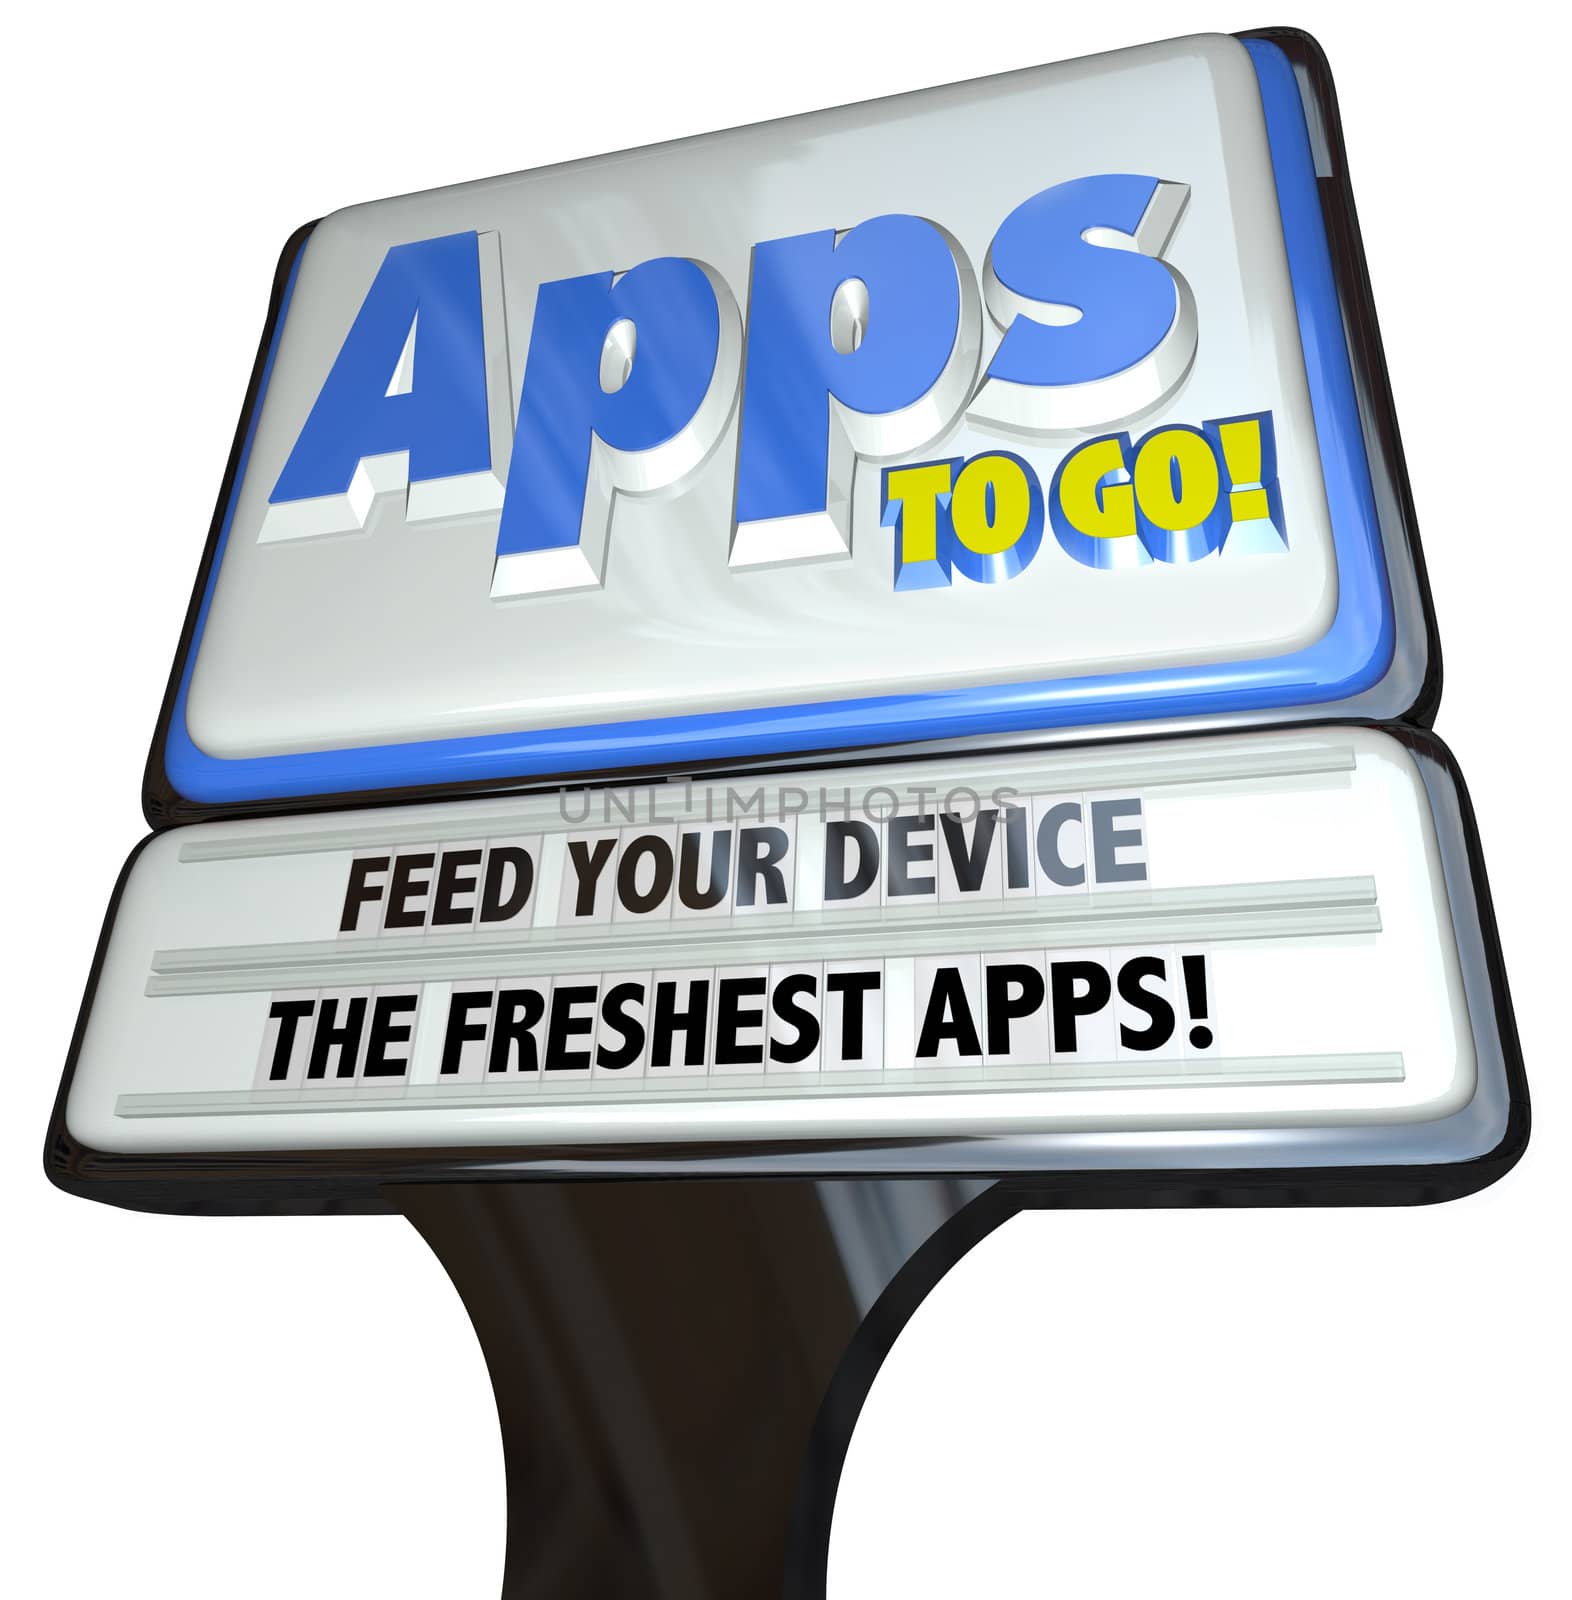 Apps to Go Sign - Feed Your Device the Freshest Applications by iQoncept